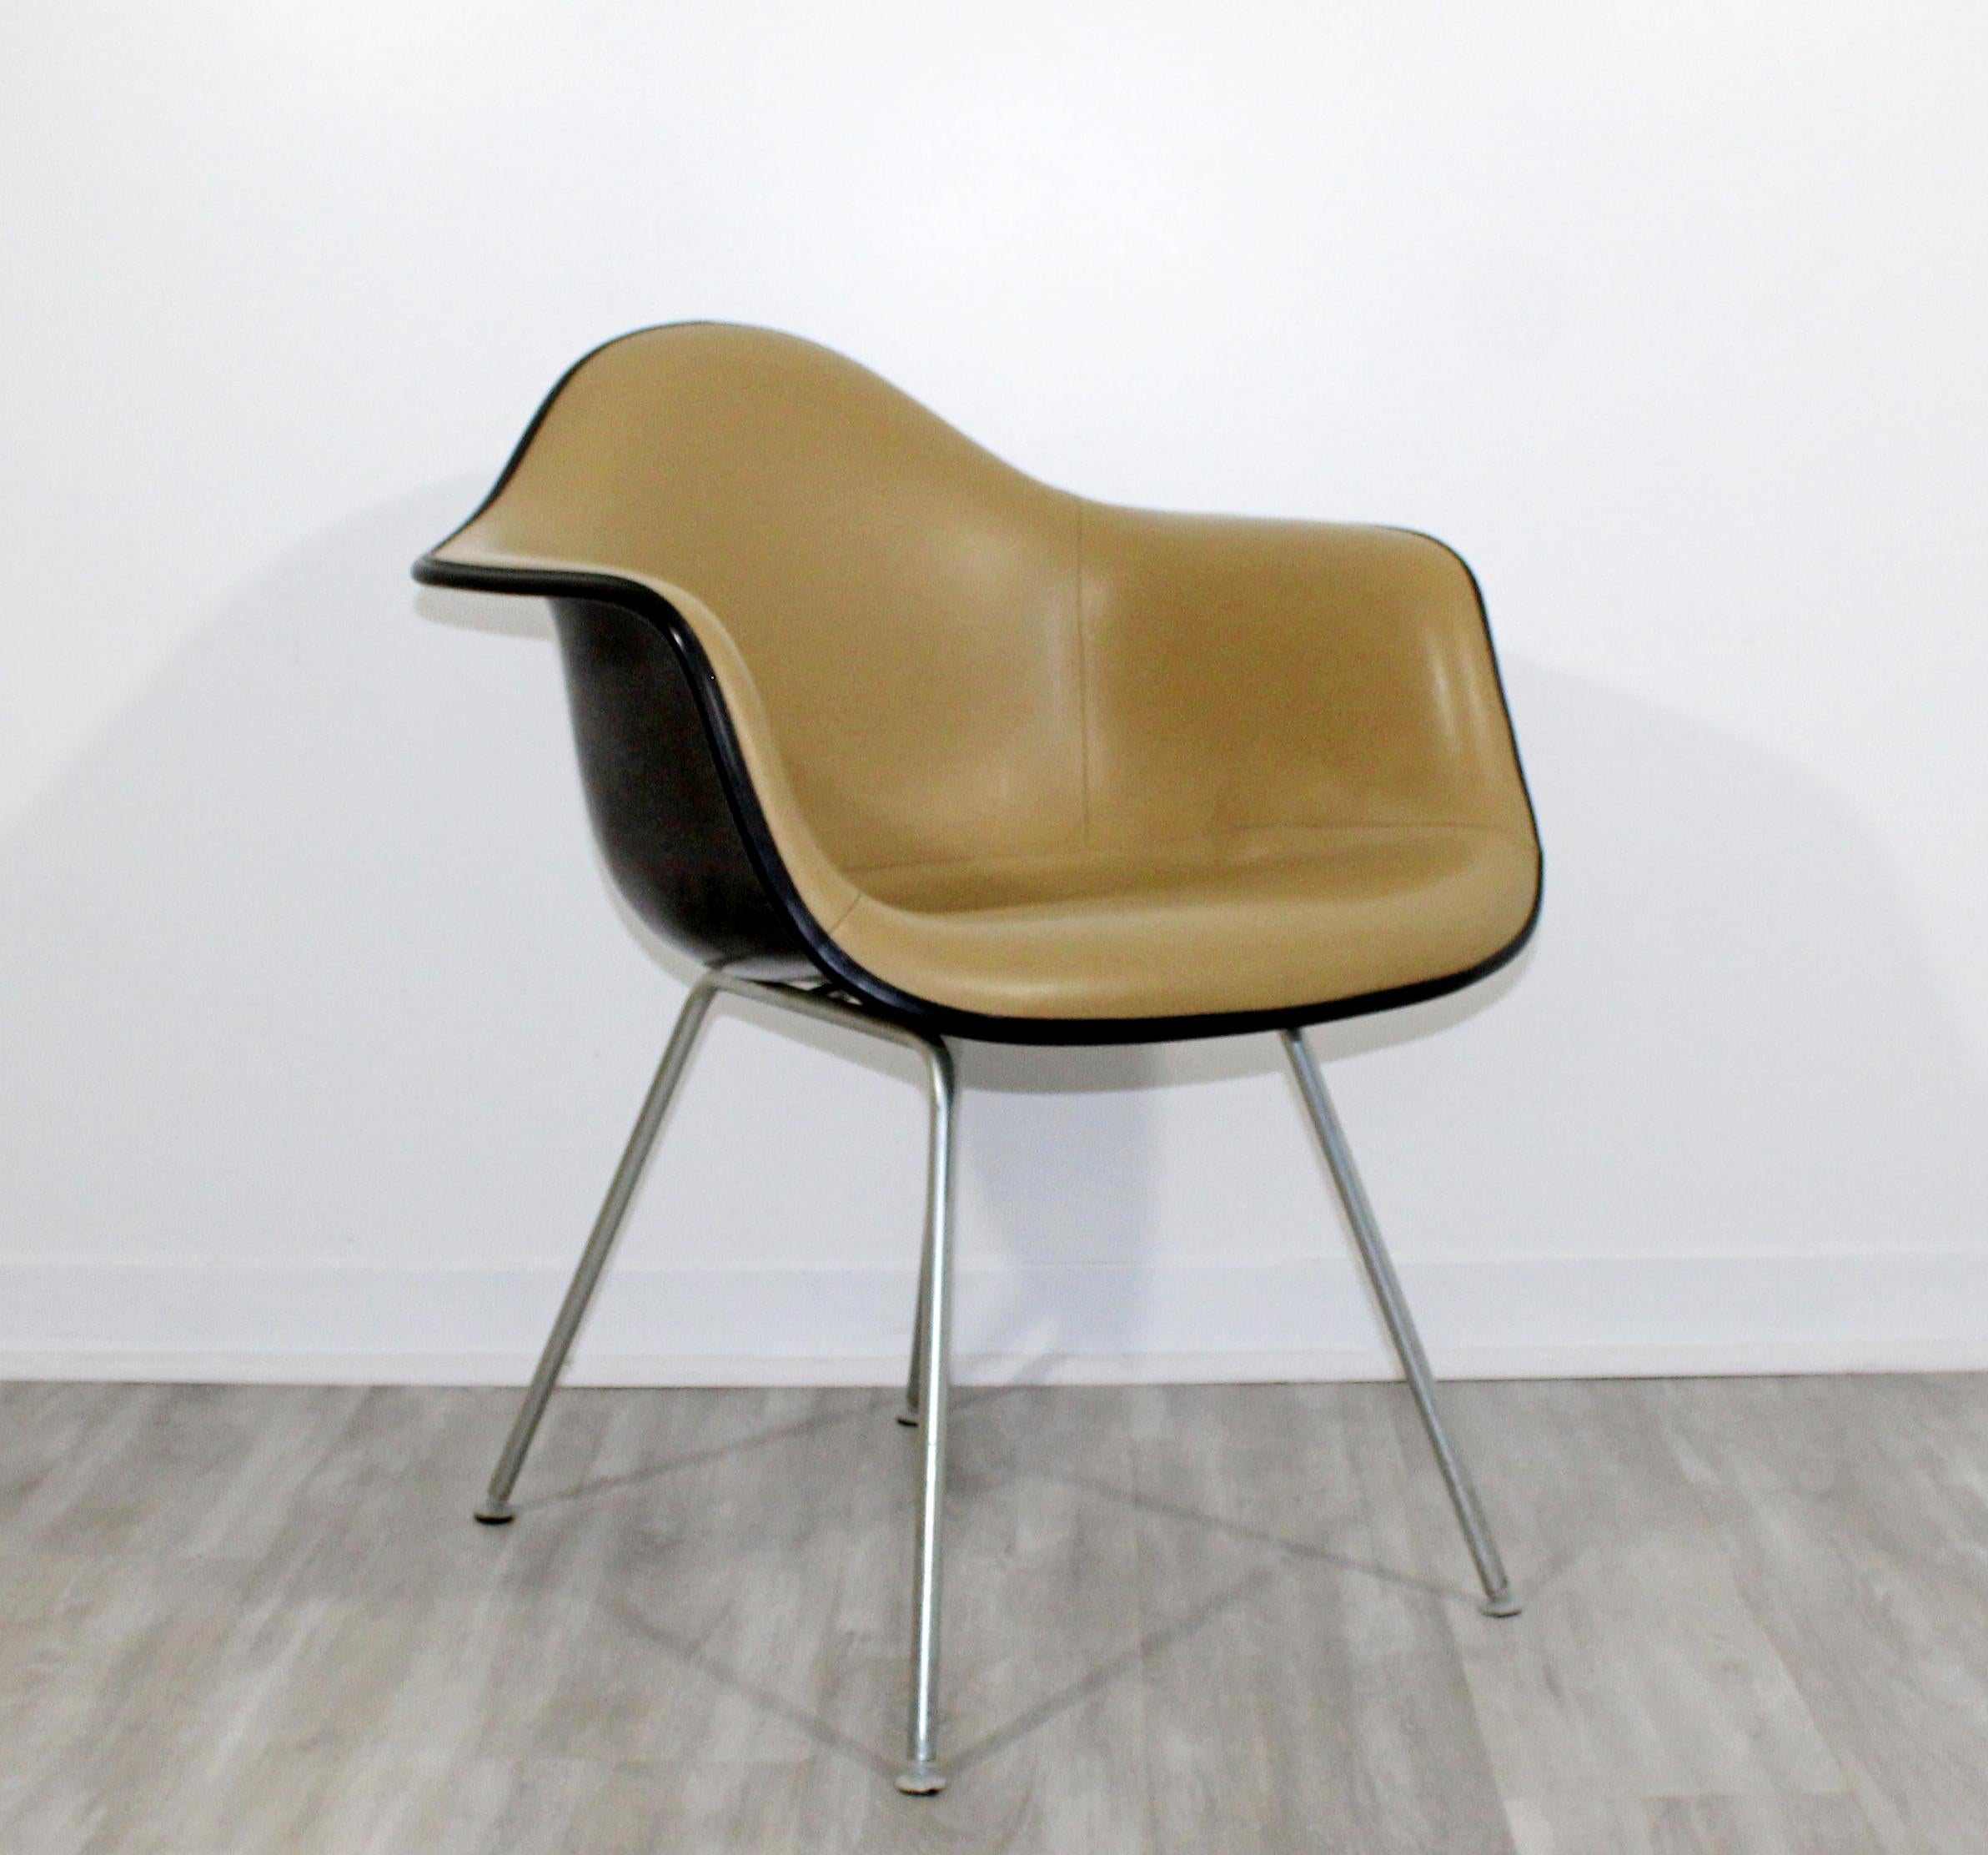 For your consideration is an original, shell armchair, with a beige Naugahyde upholstery, by Eames for Herman Miller, circa the 1960s. In excellent vintage condition. The dimensions are 25